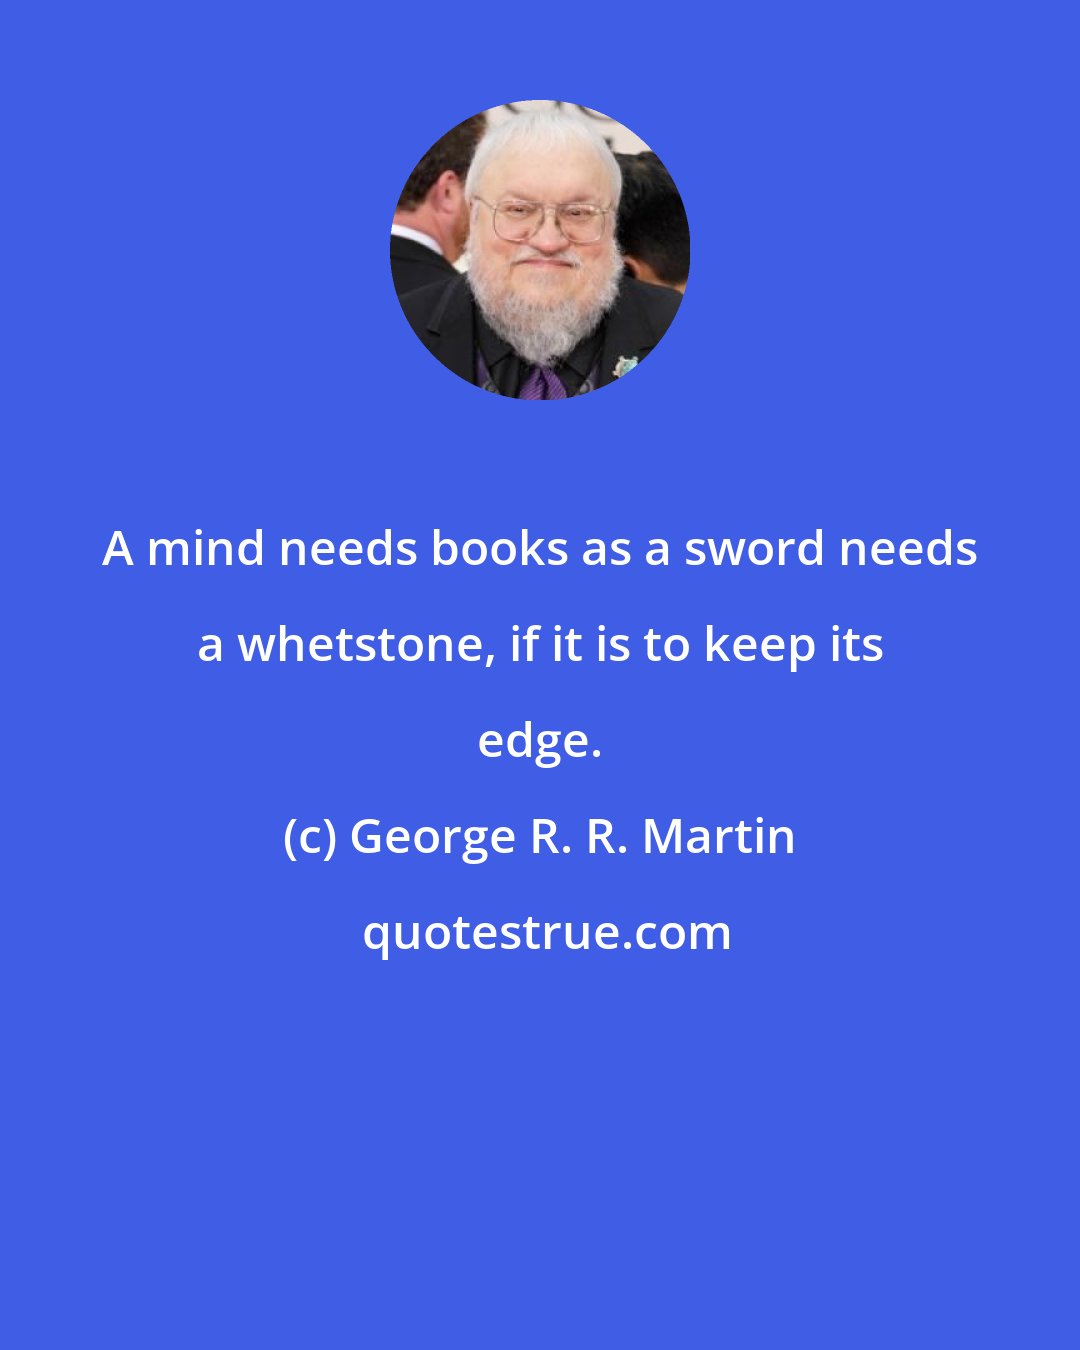 George R. R. Martin: A mind needs books as a sword needs a whetstone, if it is to keep its edge.